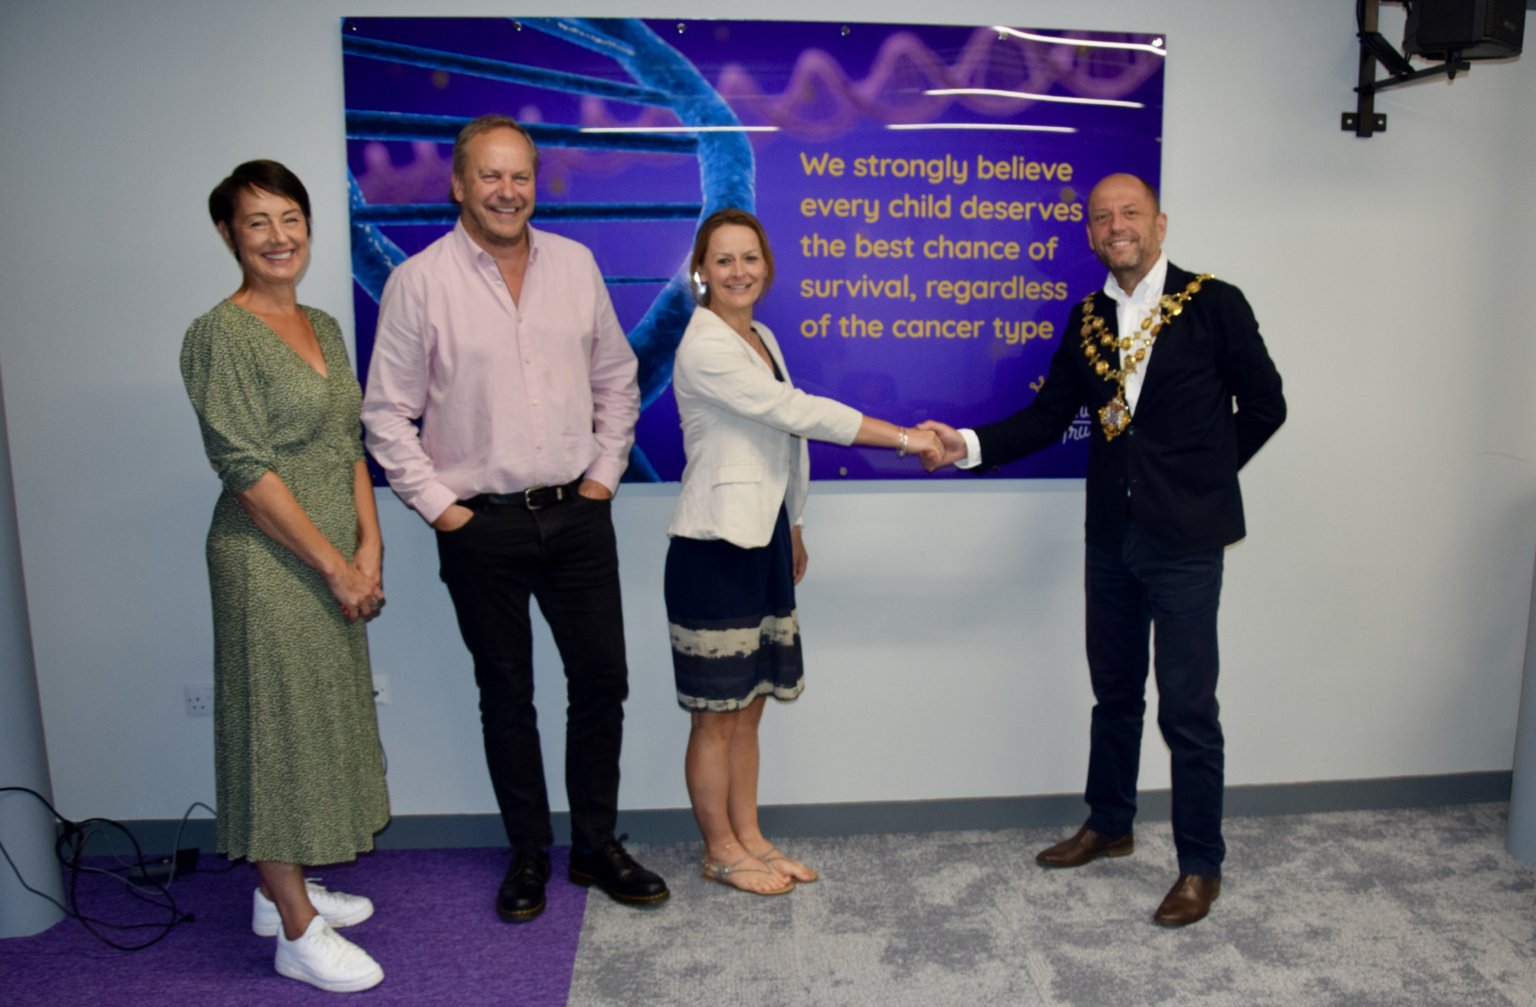 NEWS | Mayor of Hereford visits Herefordshire based charity The Little Princess Trust